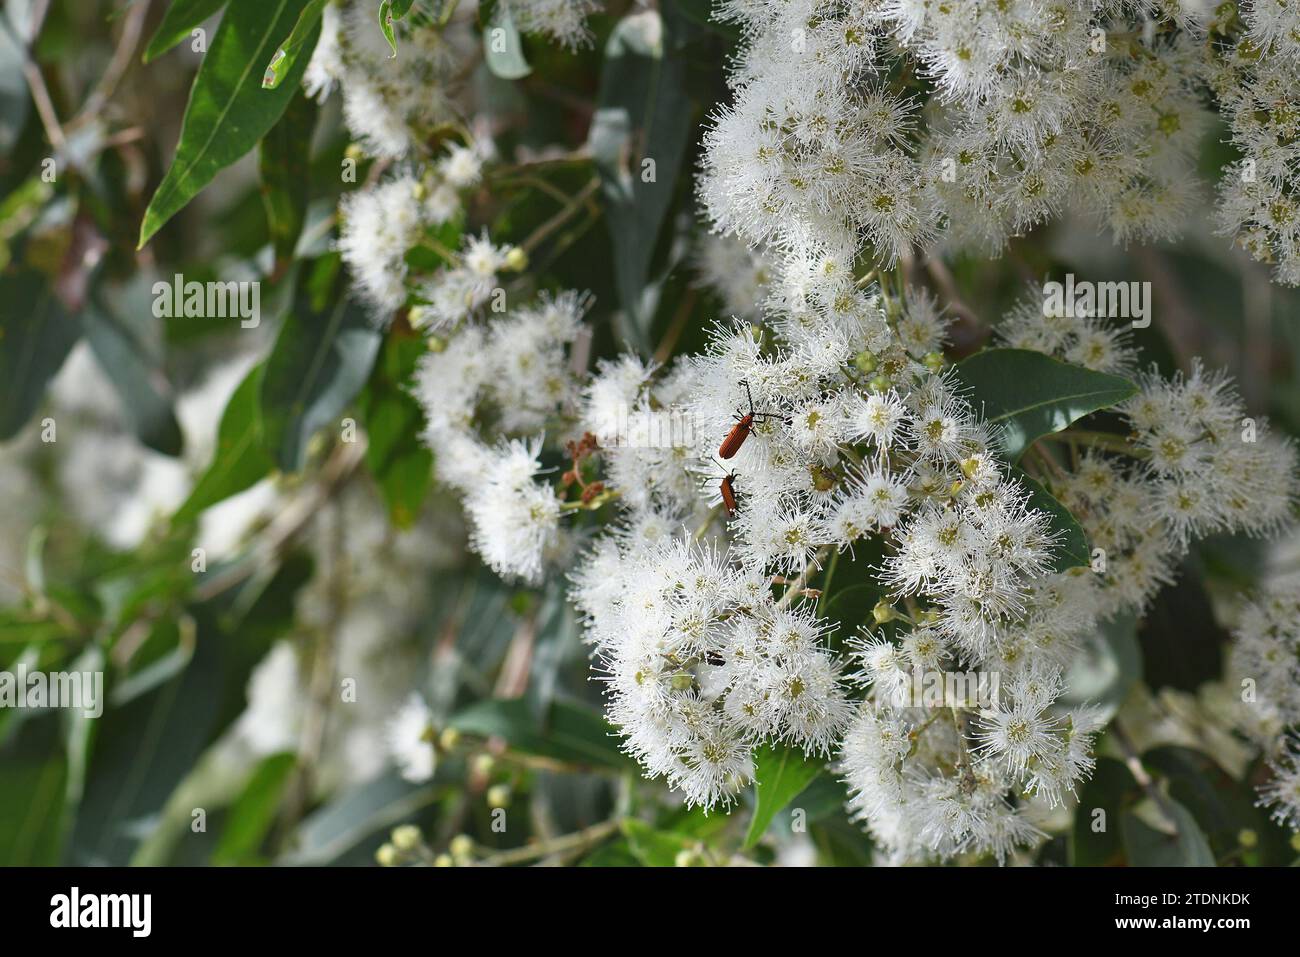 White blossoms of the Australian native Broad Leaved Apple gum tree, Angophora subvelutina, family Myrtaceae. Large tree endemic to eastern Australia. Stock Photo